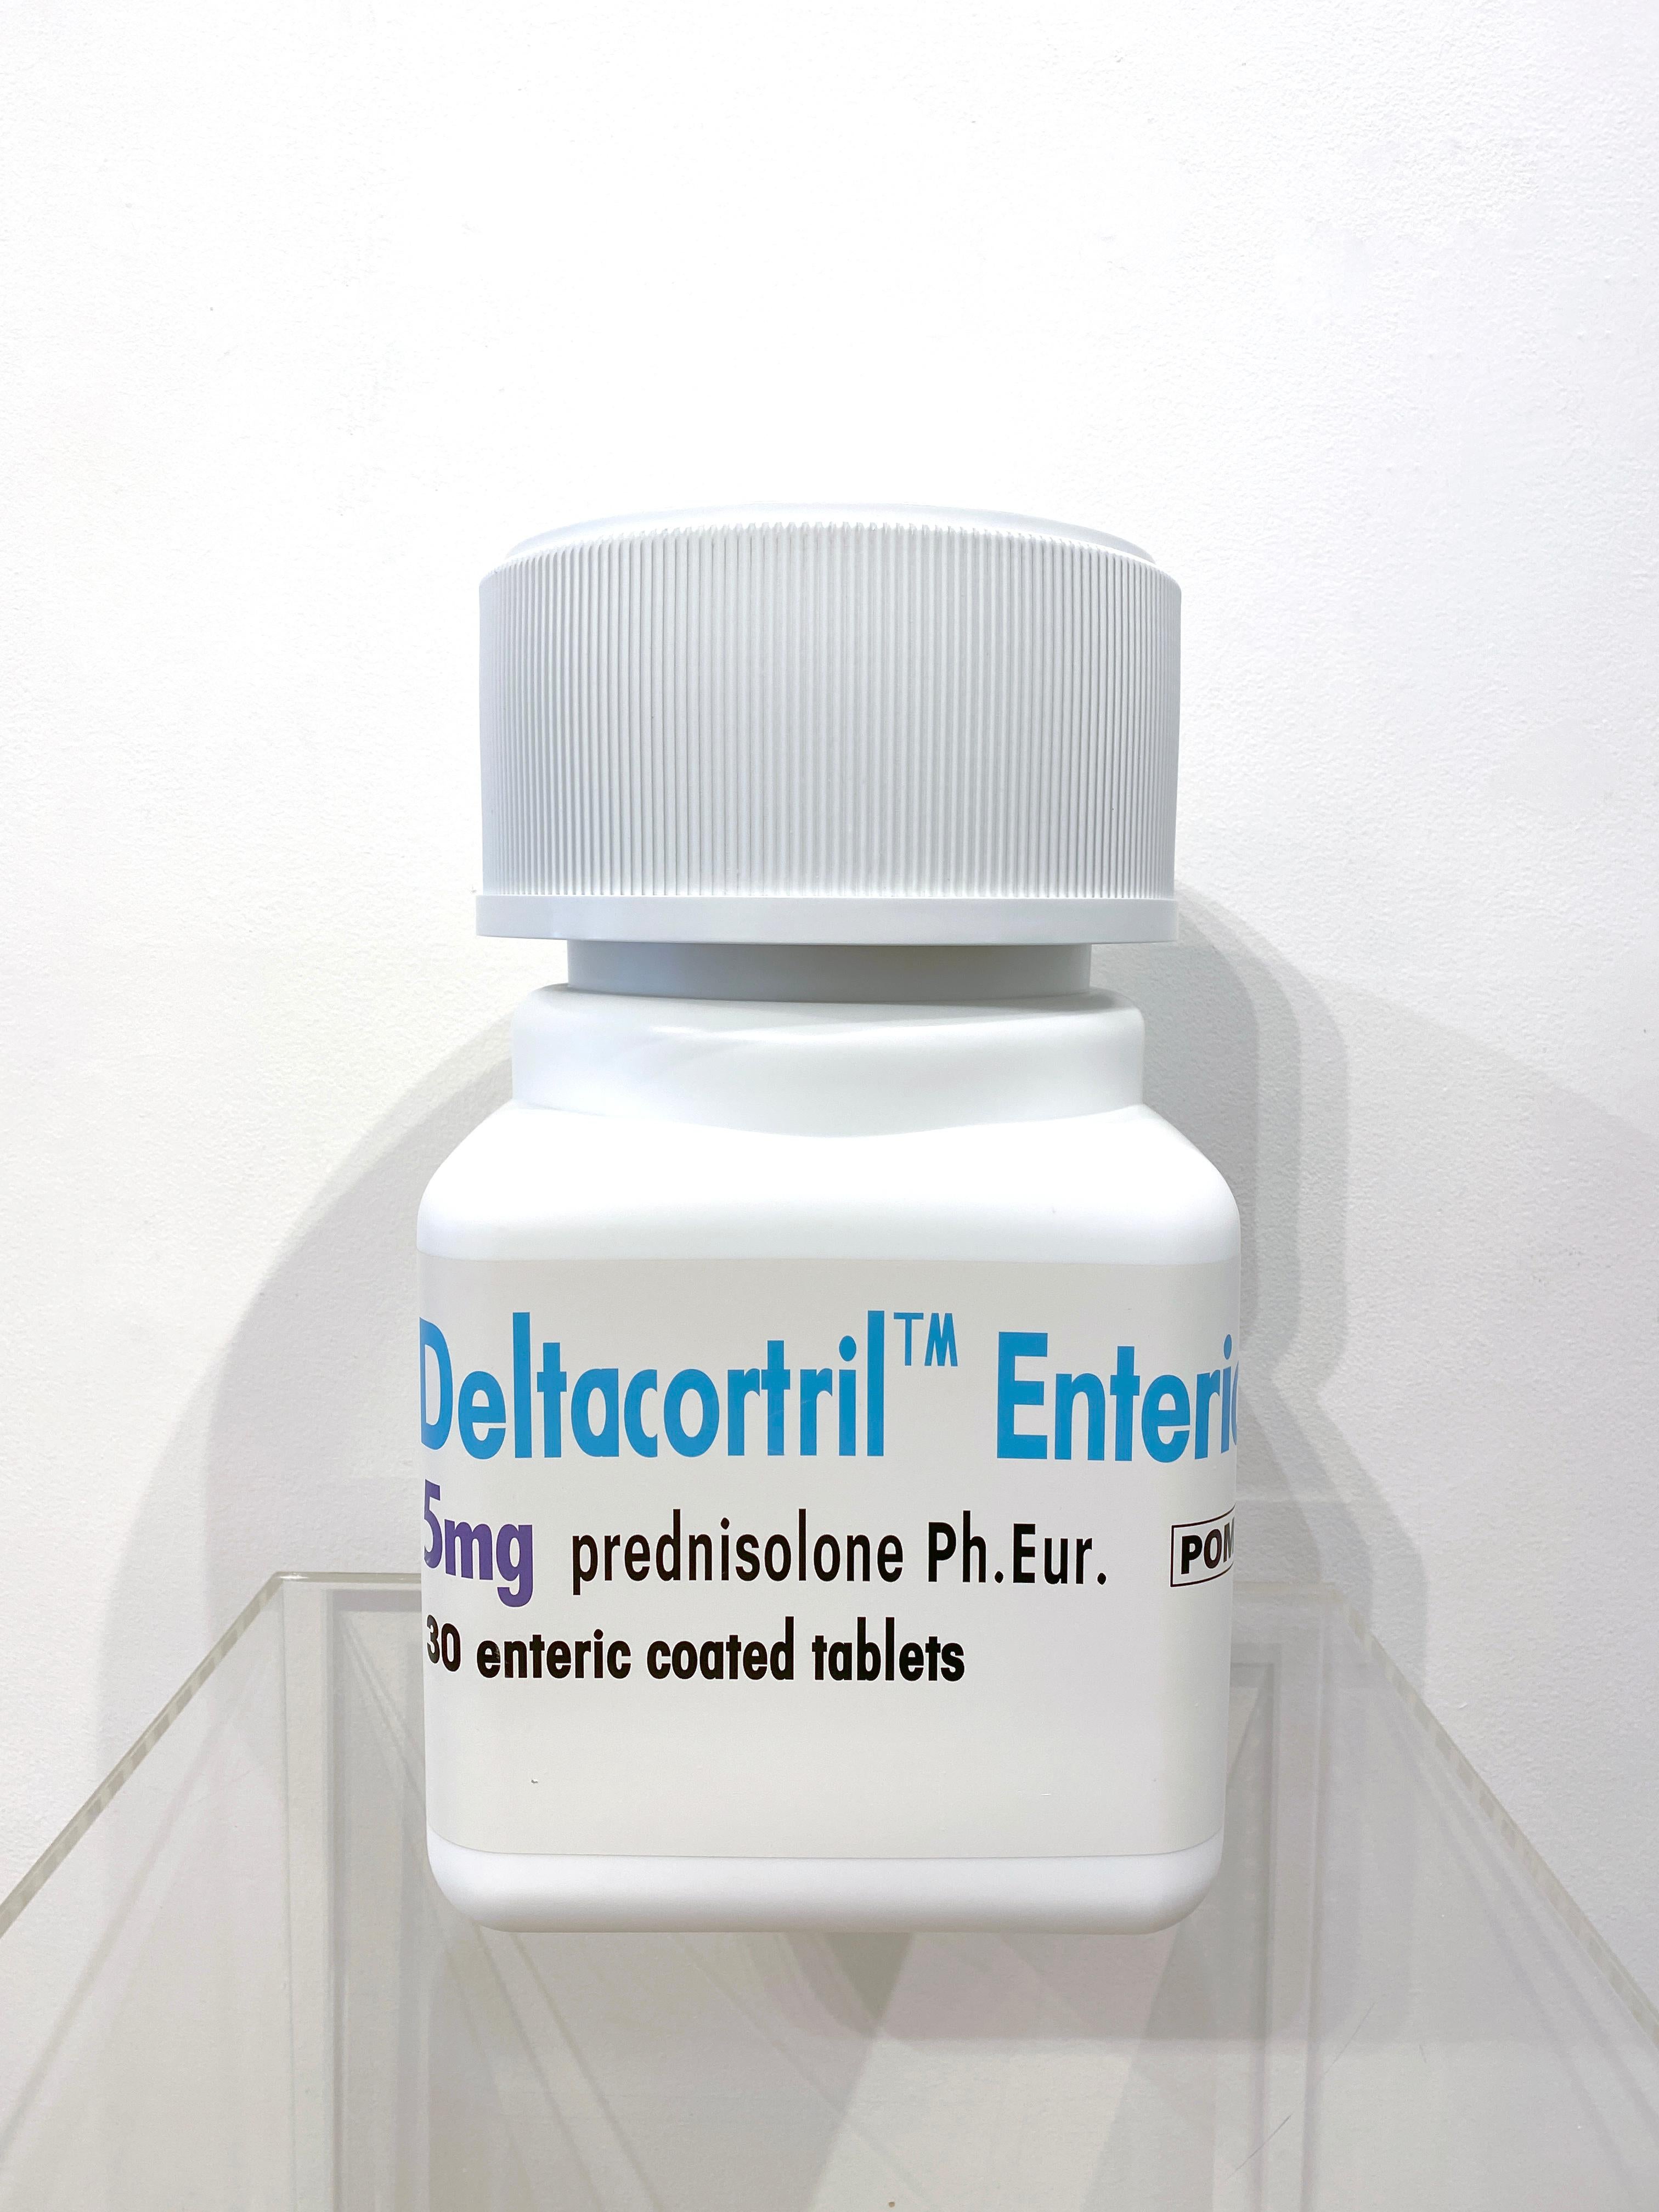 Deltacortril Enteric 5mg 30 enteric coated tablets  - Sculpture by Whisbe